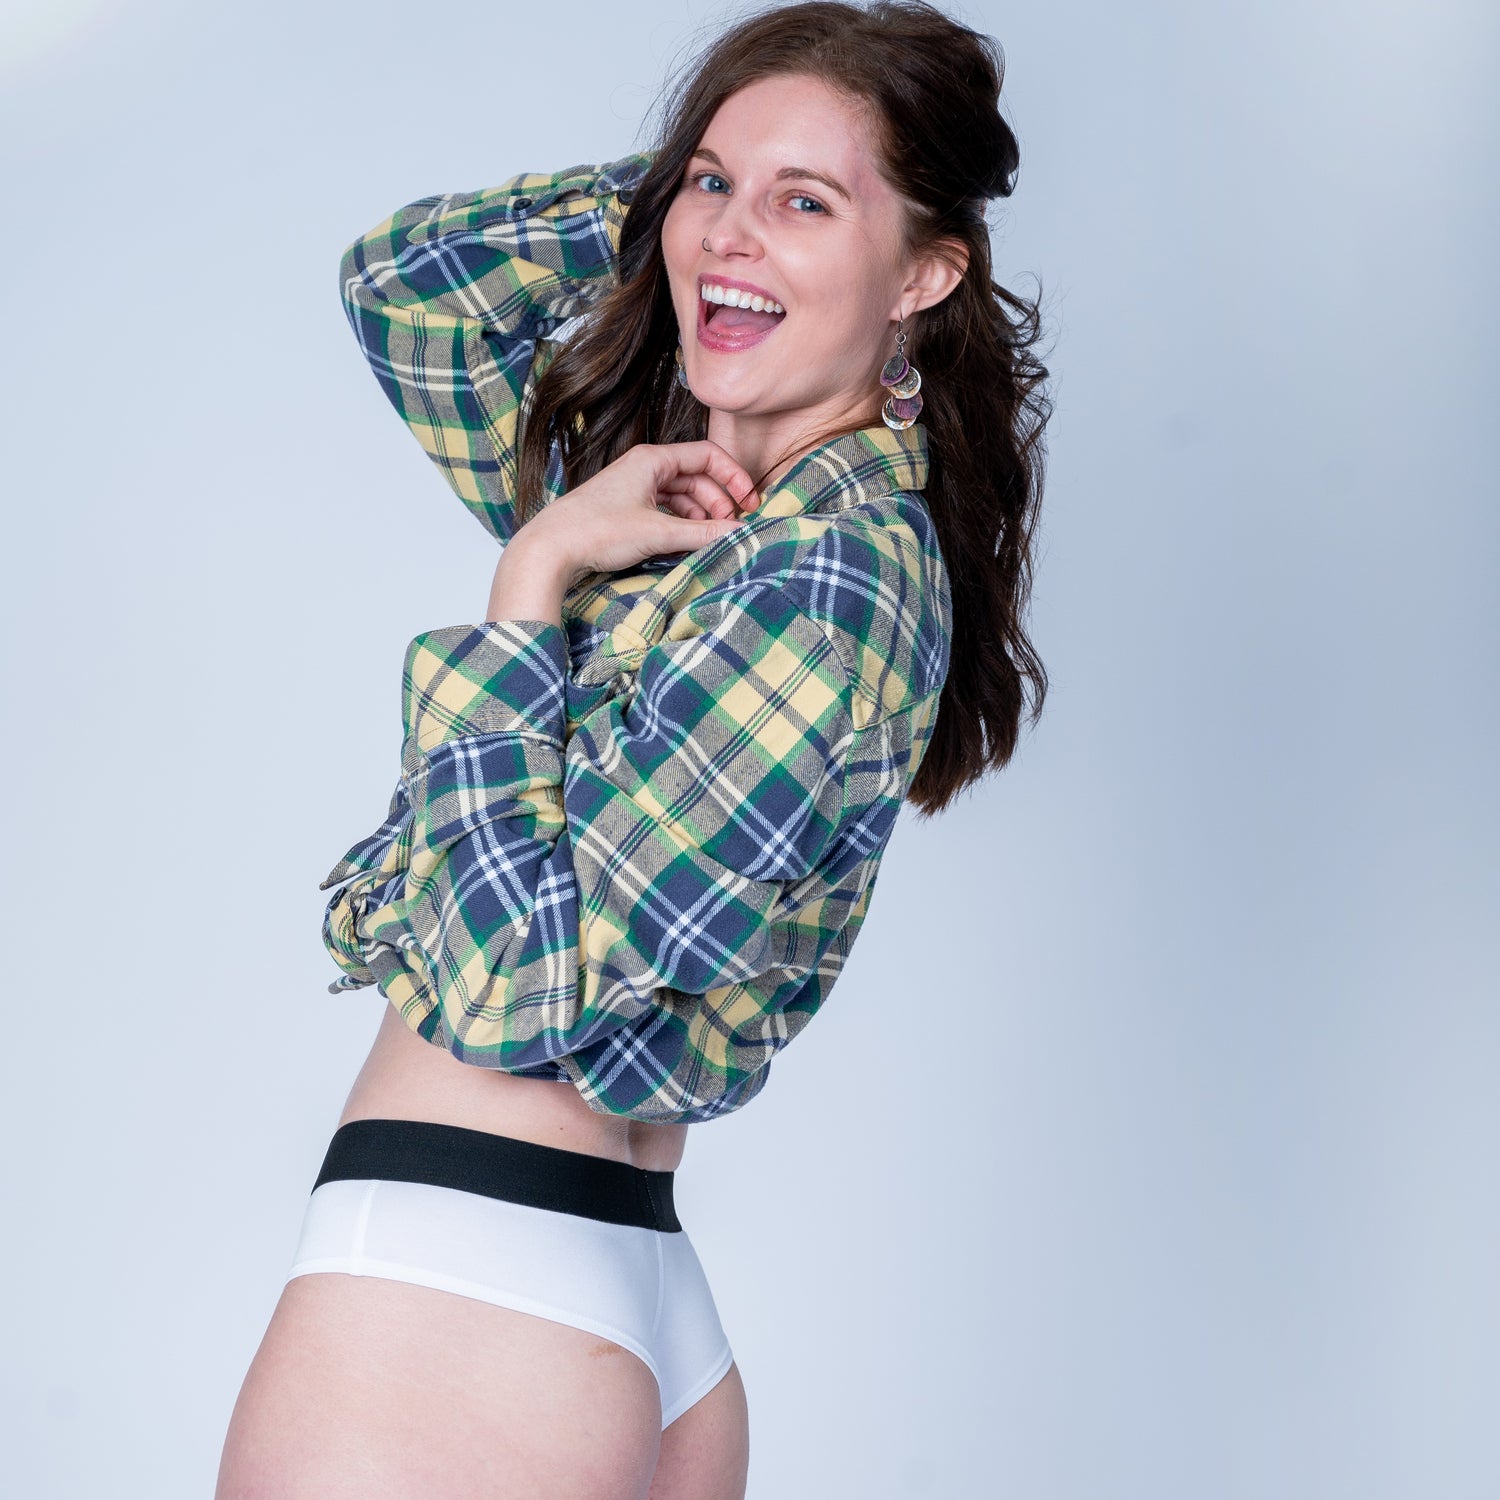 model in white do and dare cheeky underwear and a plaid flannel smiling big at camera